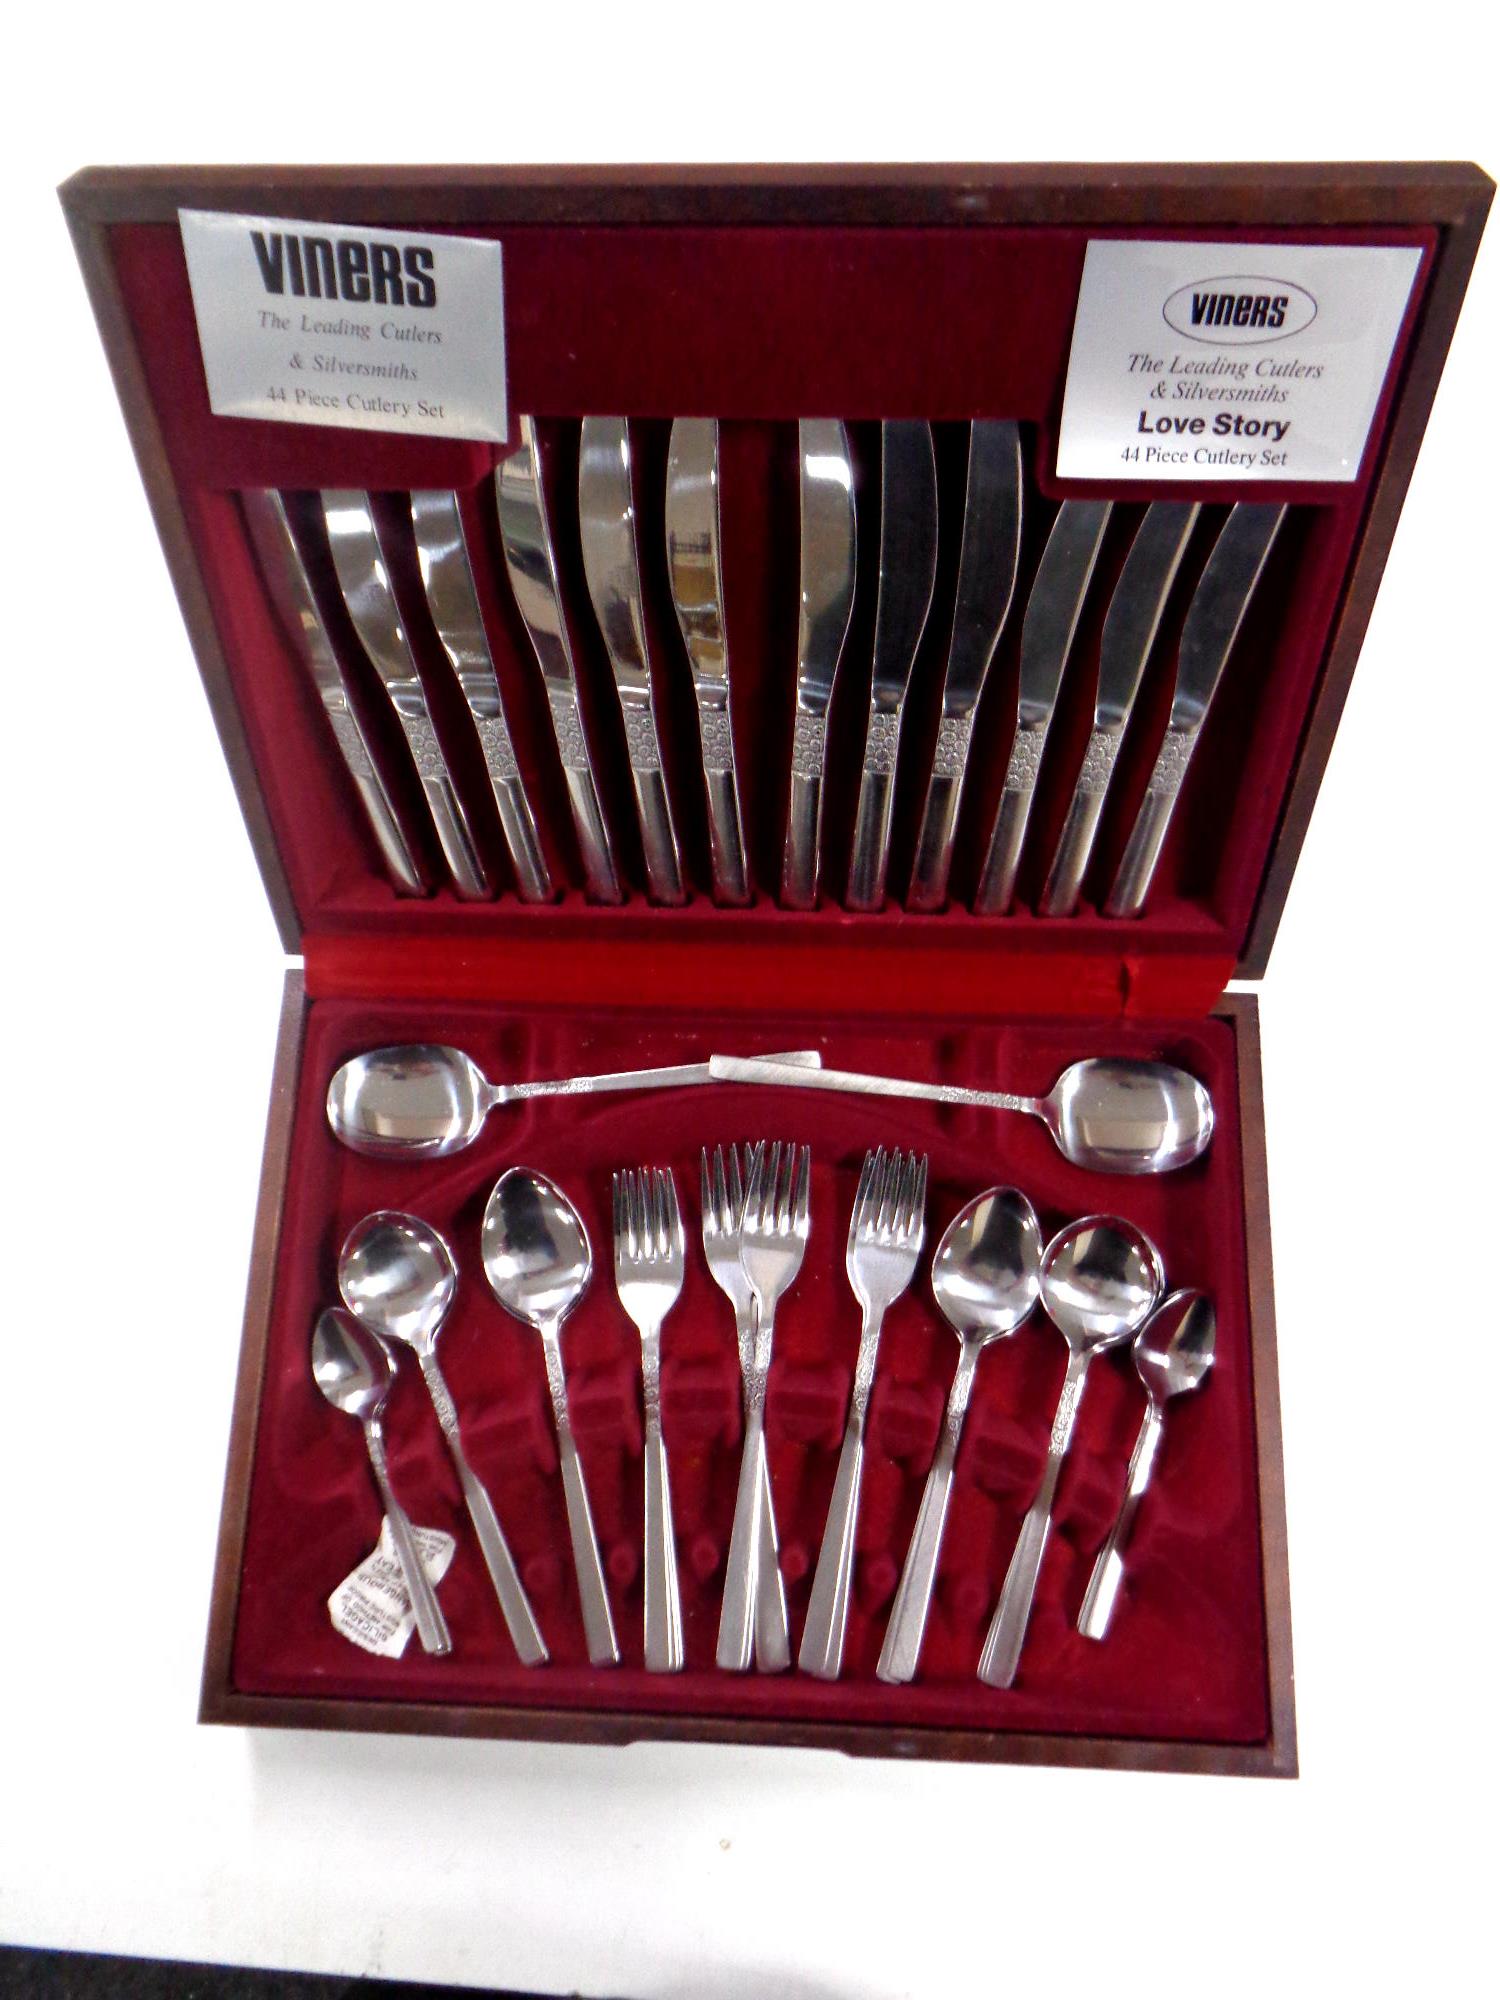 A Viner's Love Story 44 piece cutlery set in canteen.